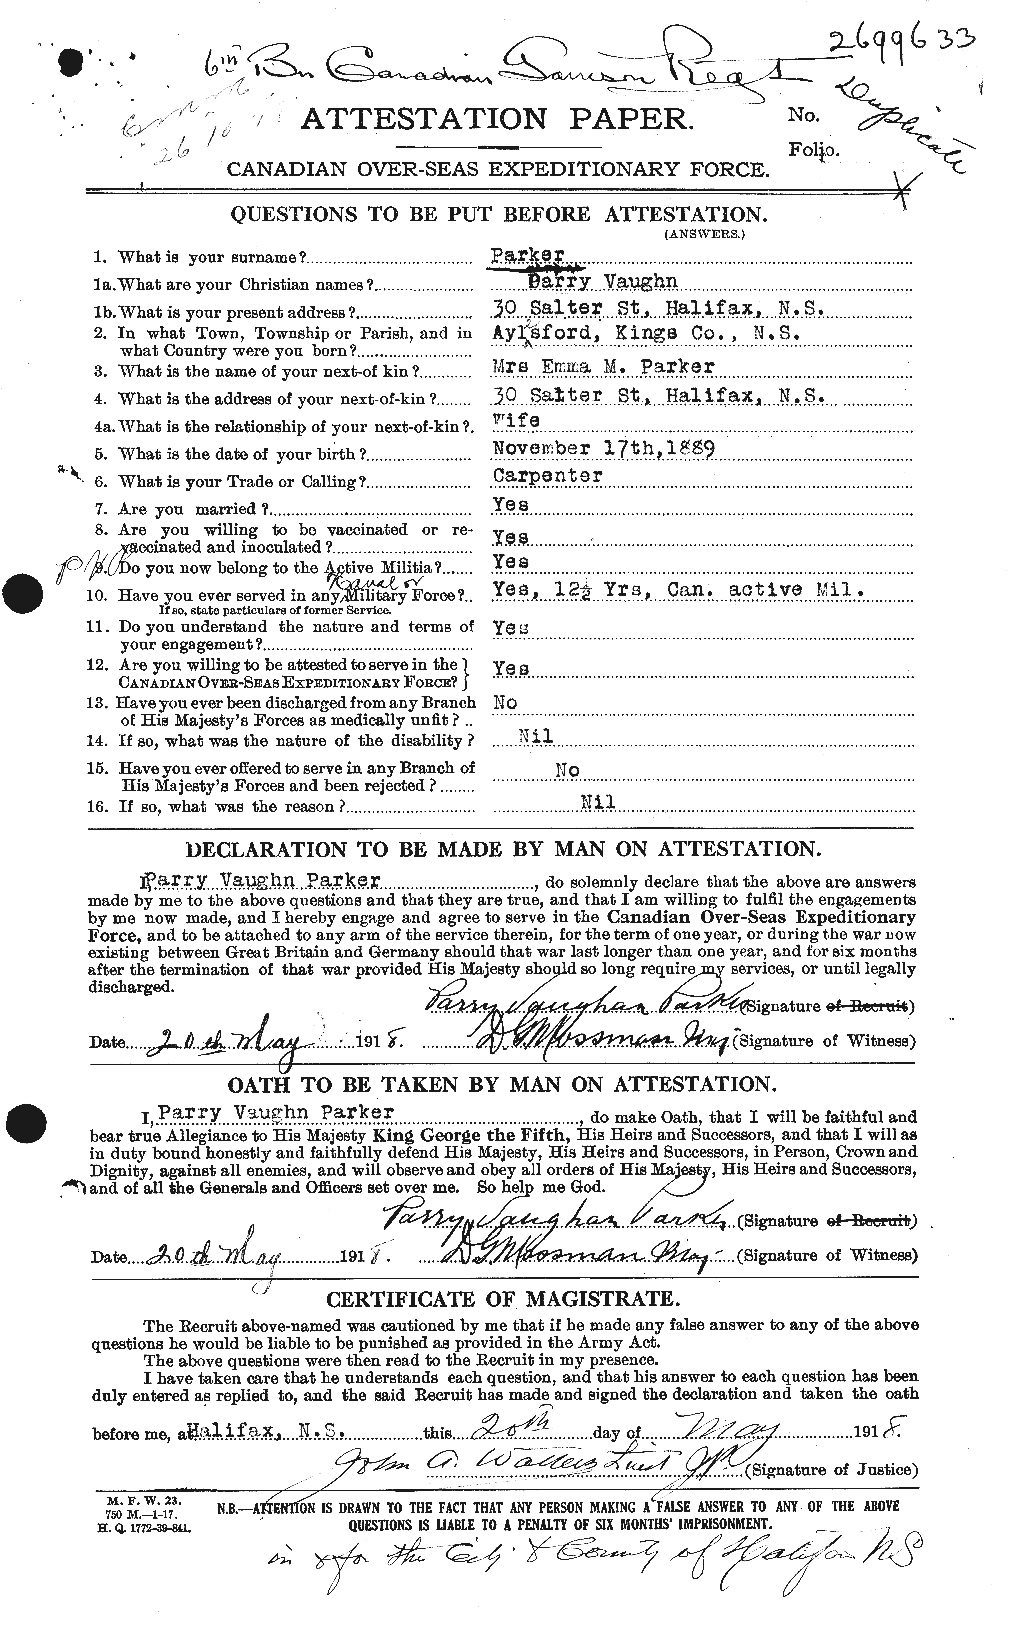 Personnel Records of the First World War - CEF 565553a